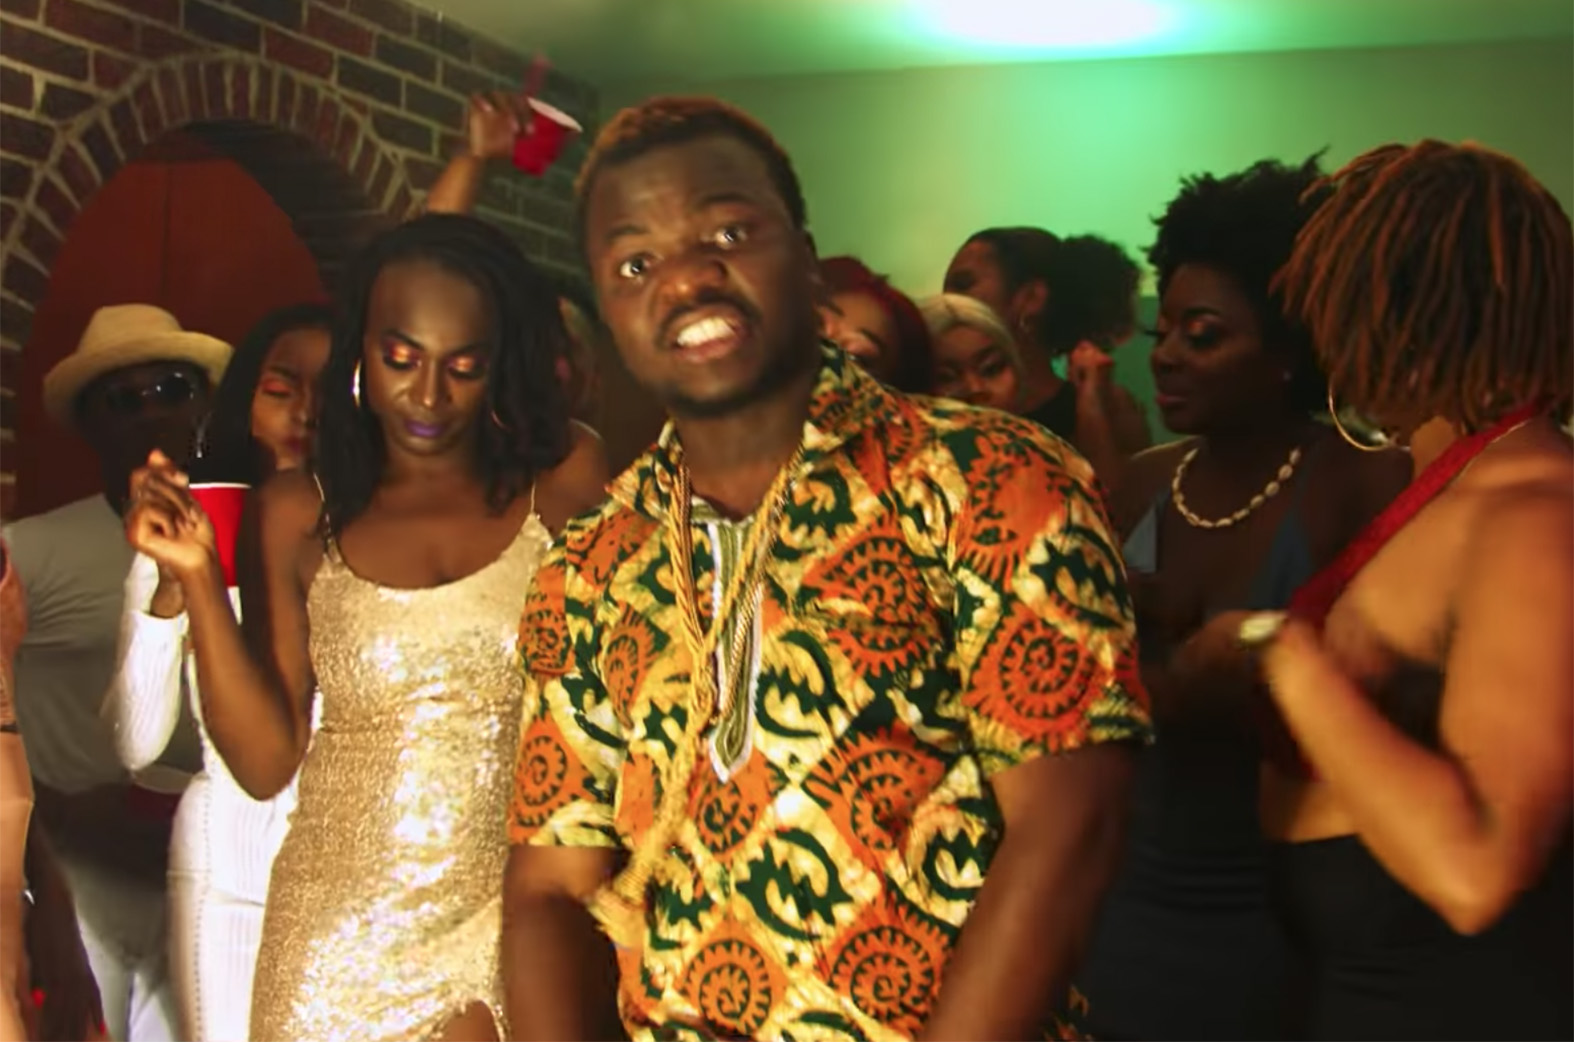 Video: Hangover by GhCALI feat. Success K